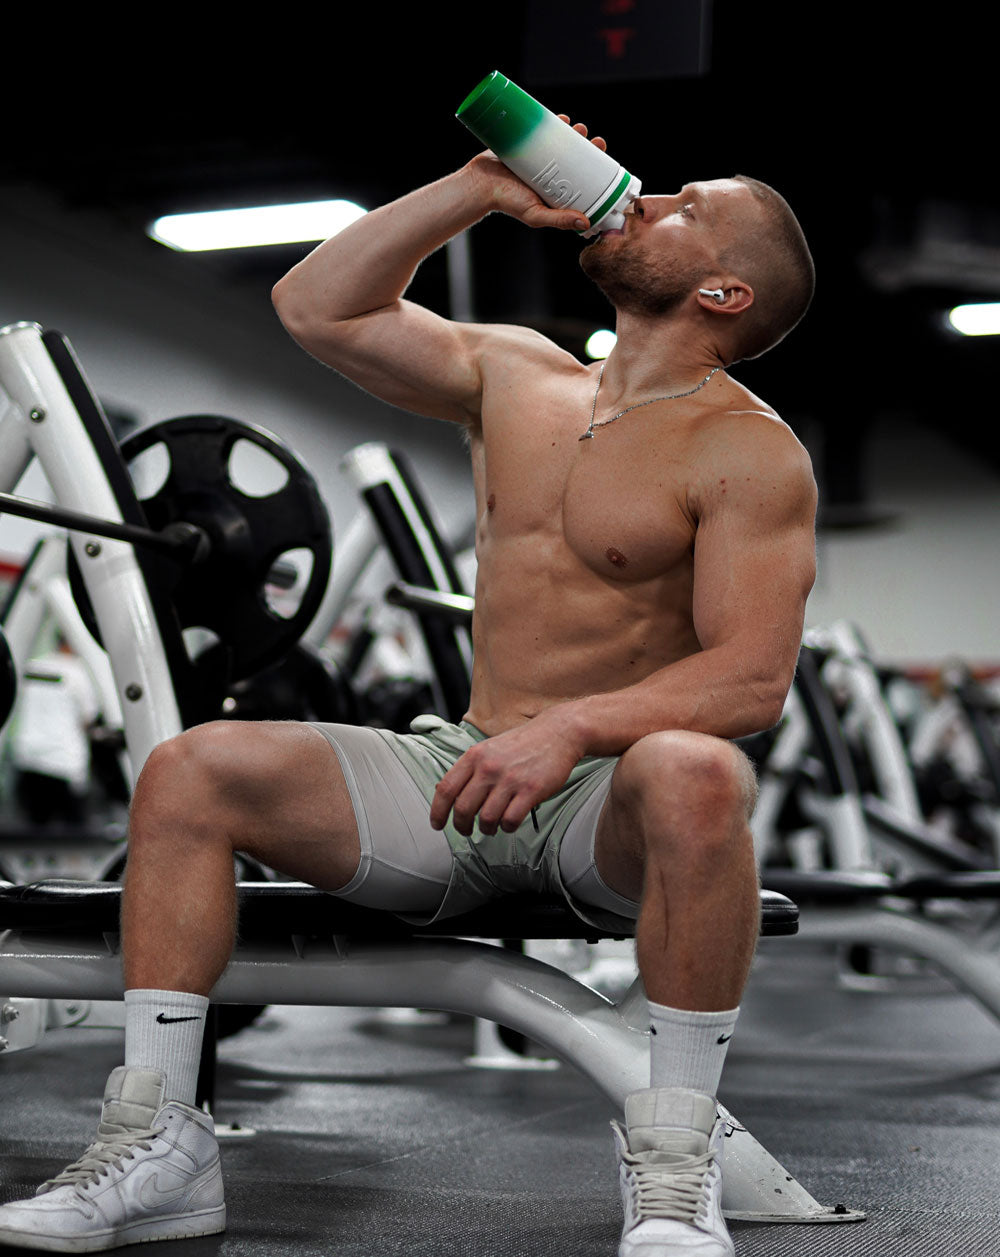 An image of a man with big muscles in a gym. He is sitting on a workout bench and is taking a big drink from his 26oz Ice Shaker.